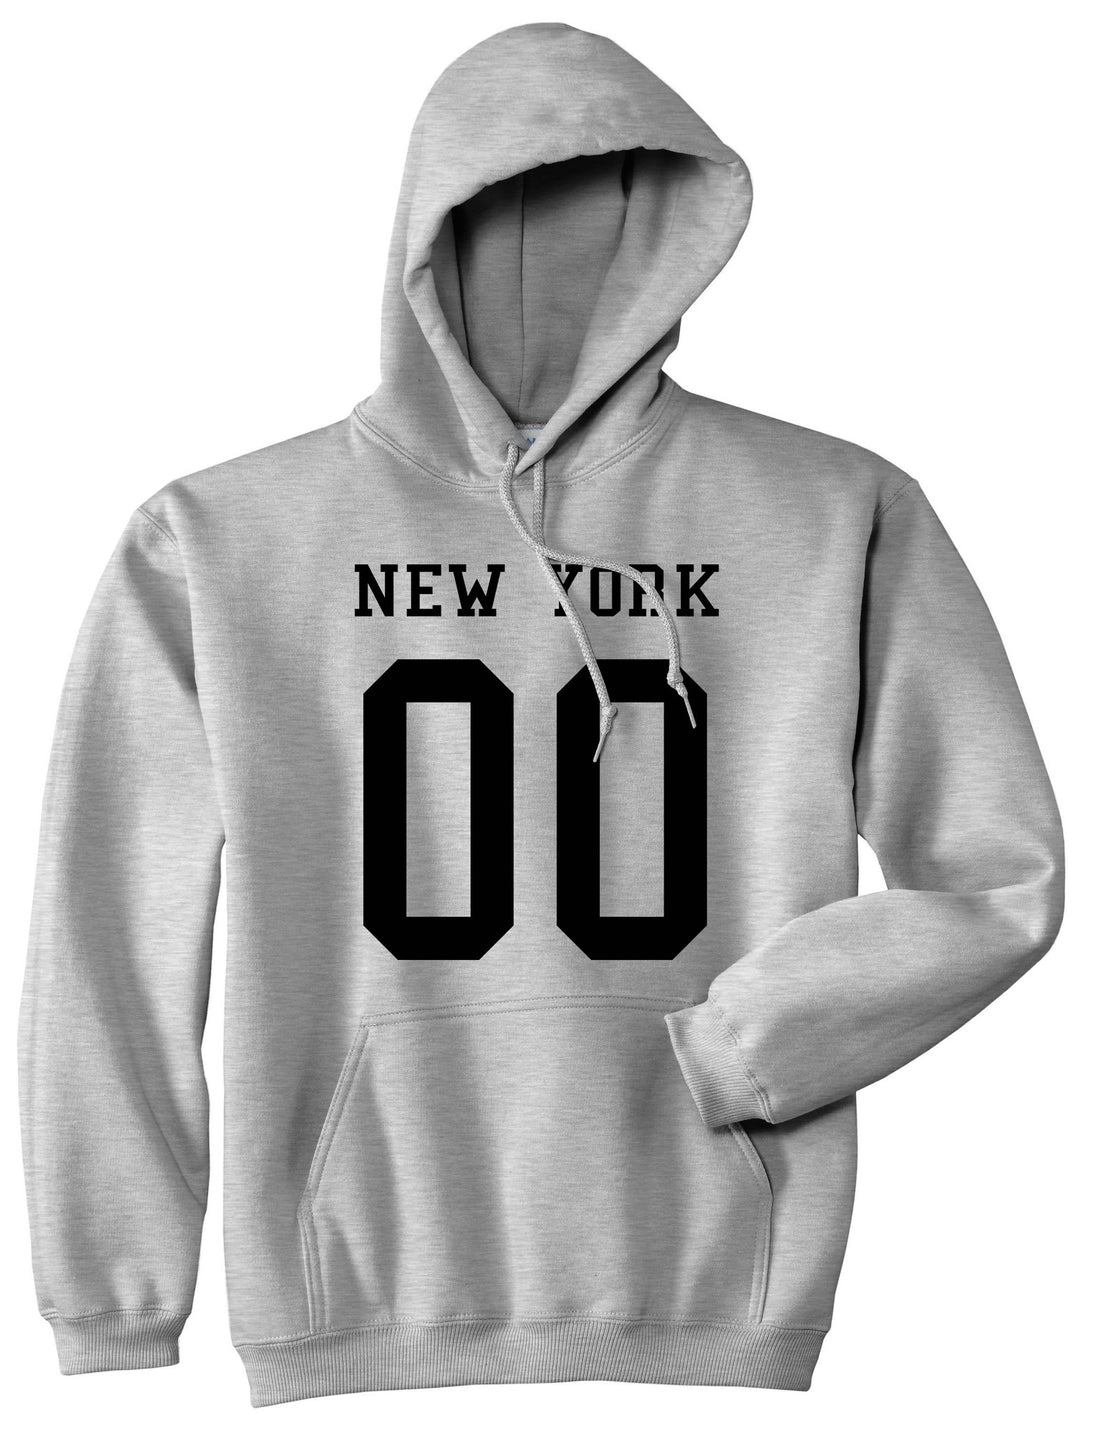 New York Team 00 Jersey Pullover Hoodie in Grey By Kings Of NY